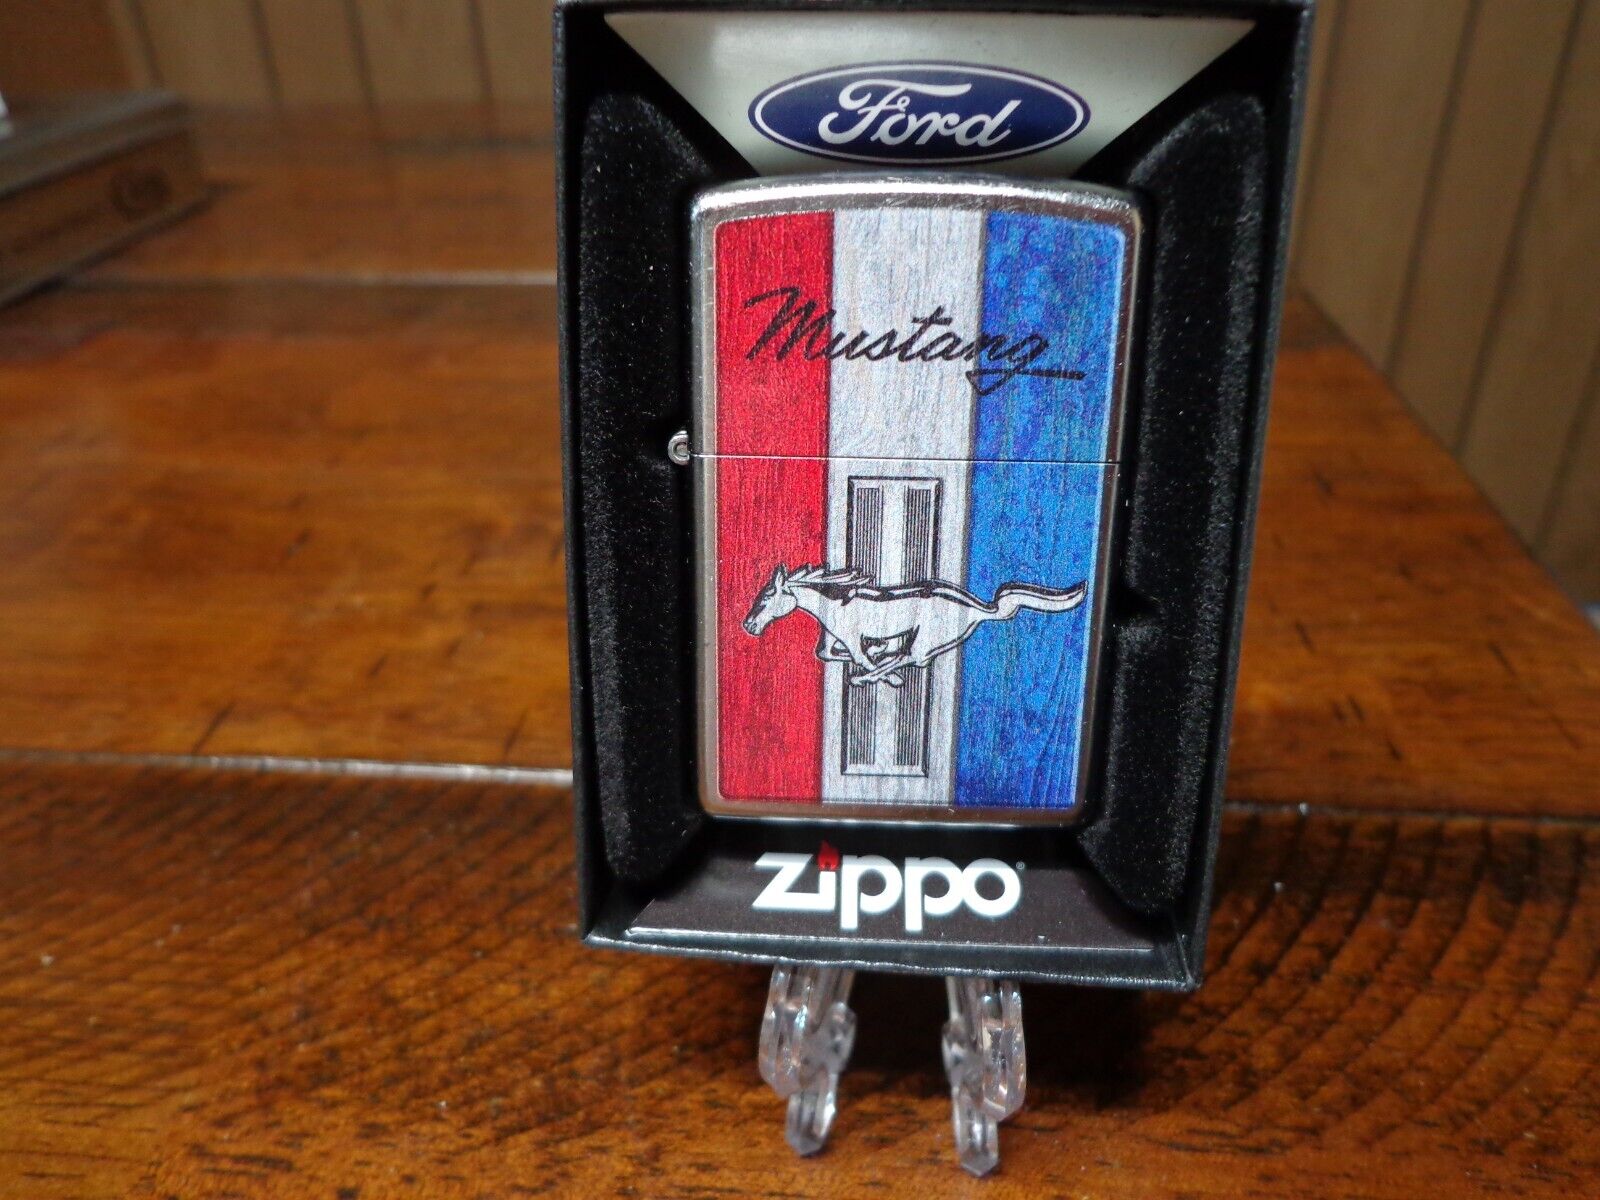 FORD MUSTANG LOGO RED WHITE & BLUE DESIGN ZIPPO LIGHTER MINT IN BOX. Available Now for 28.95